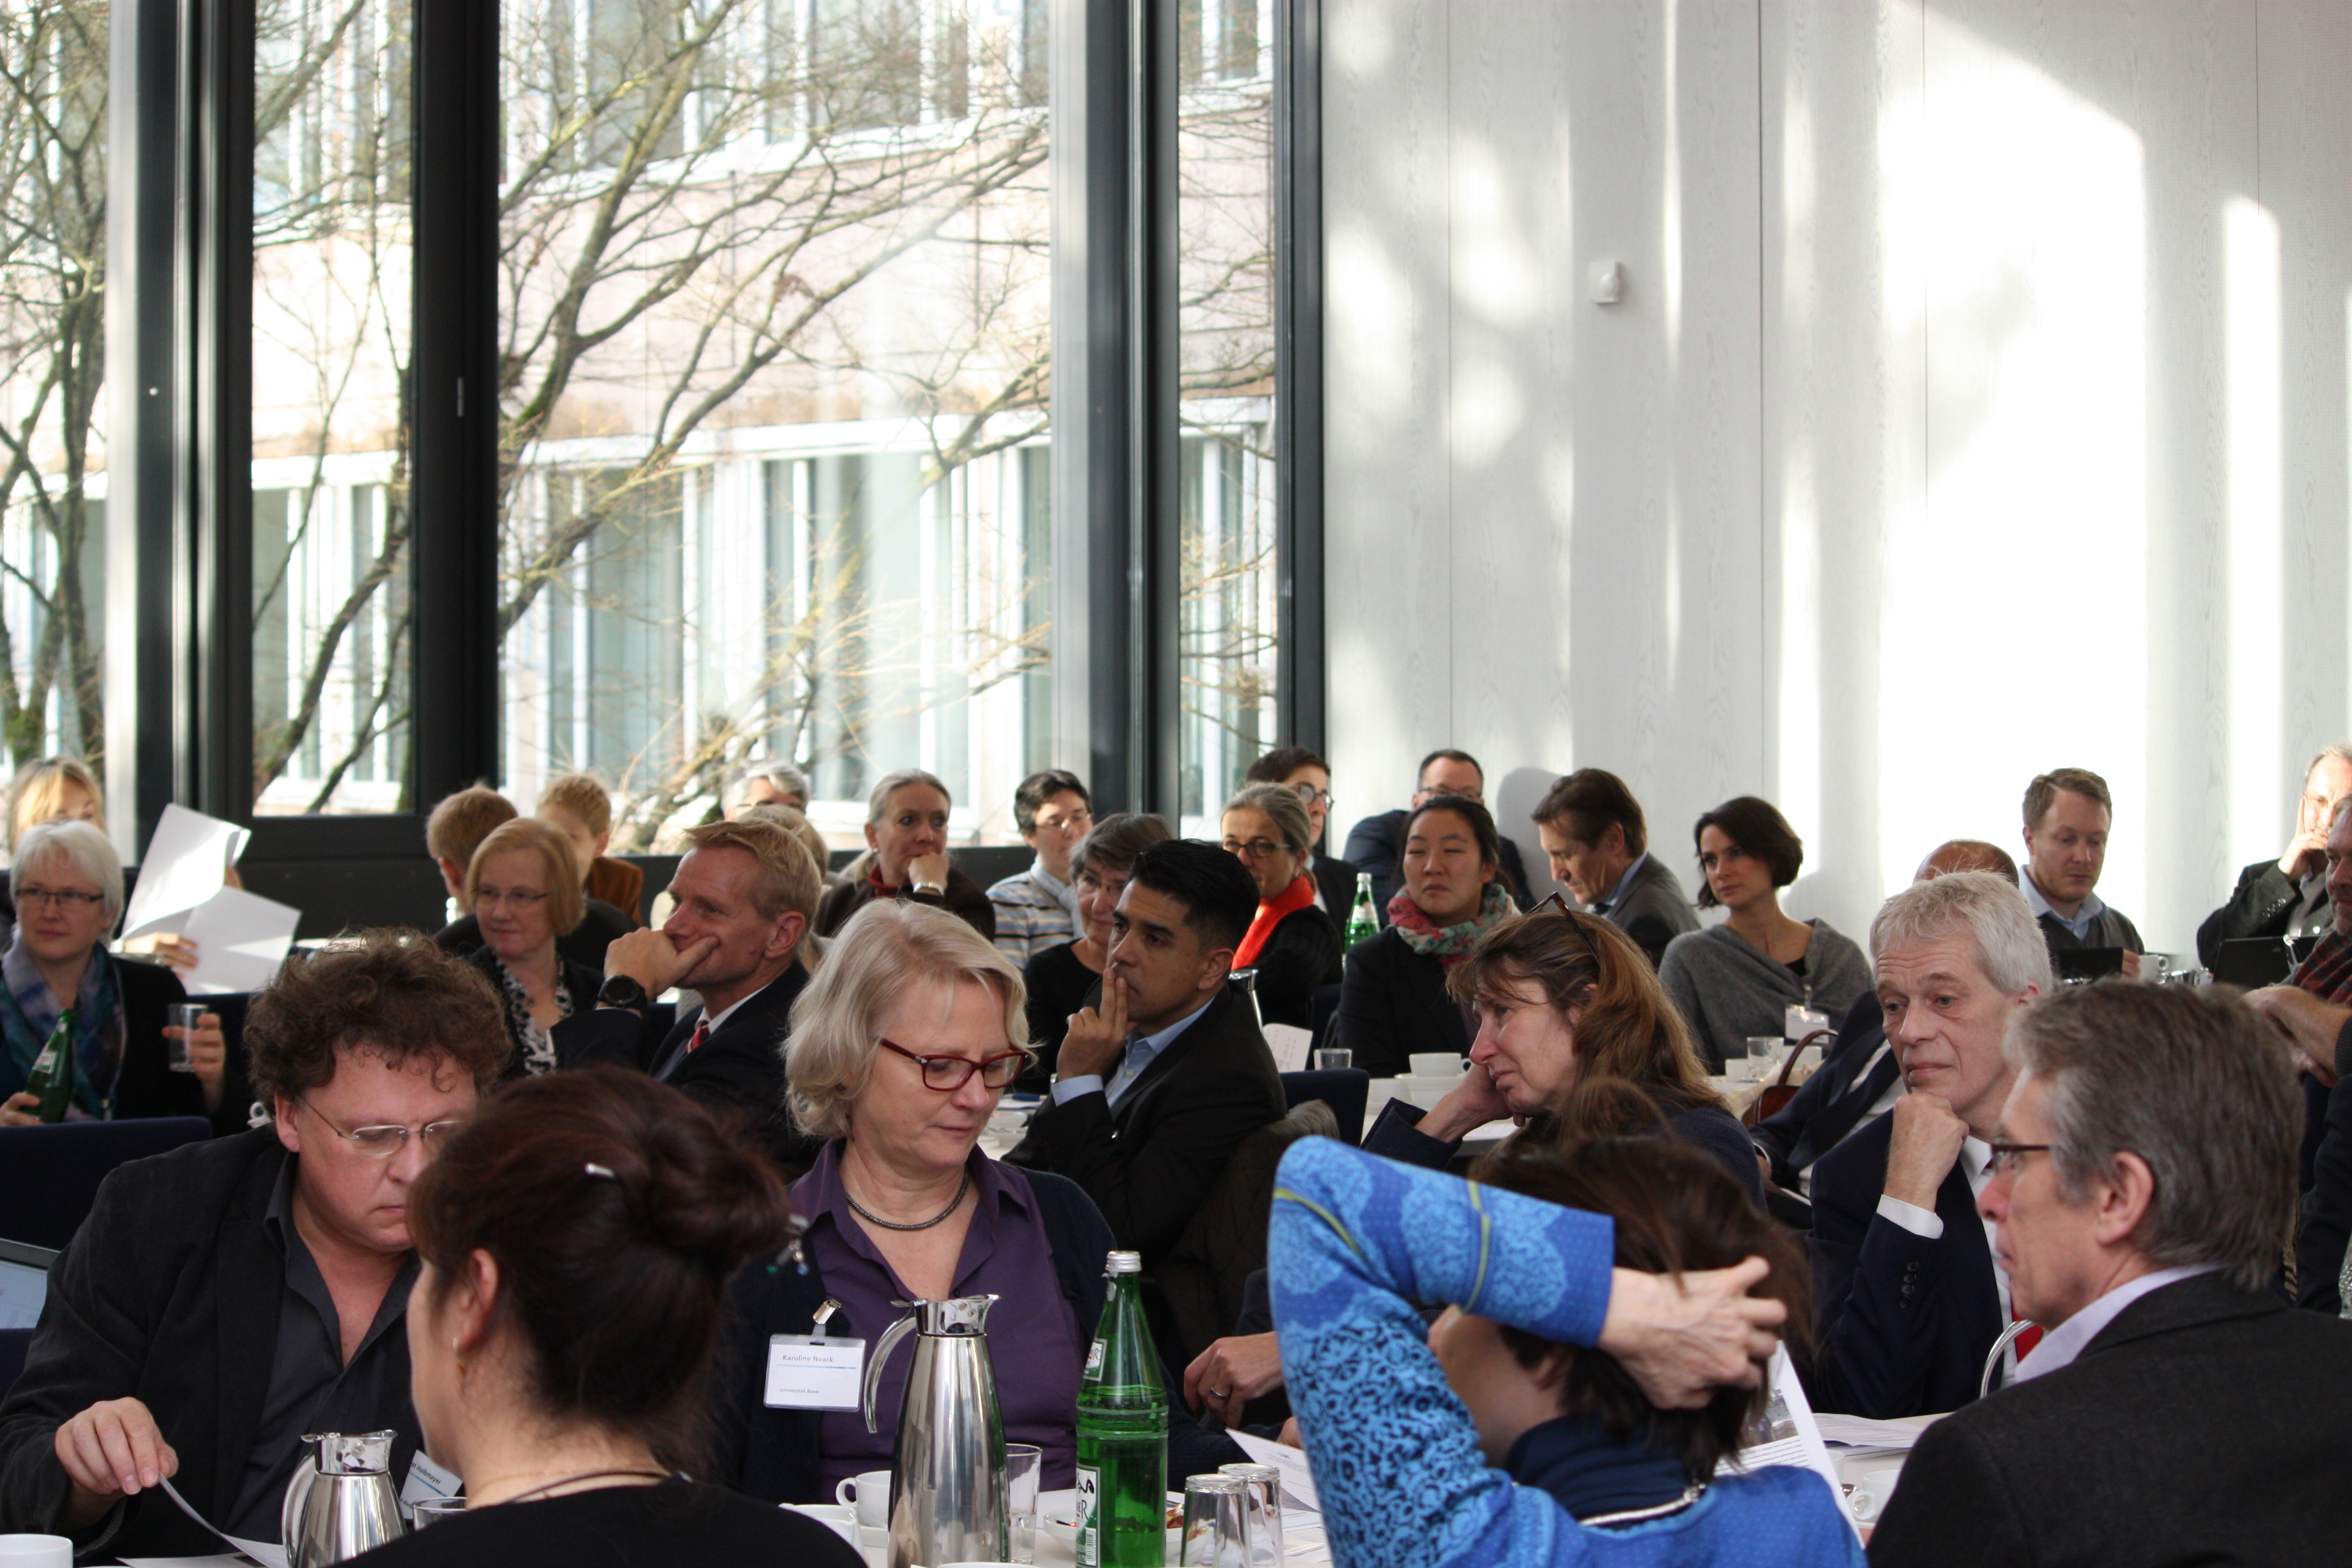 The Latin America Experts' Day at the DFG in Bonn attracted a large number of attendees